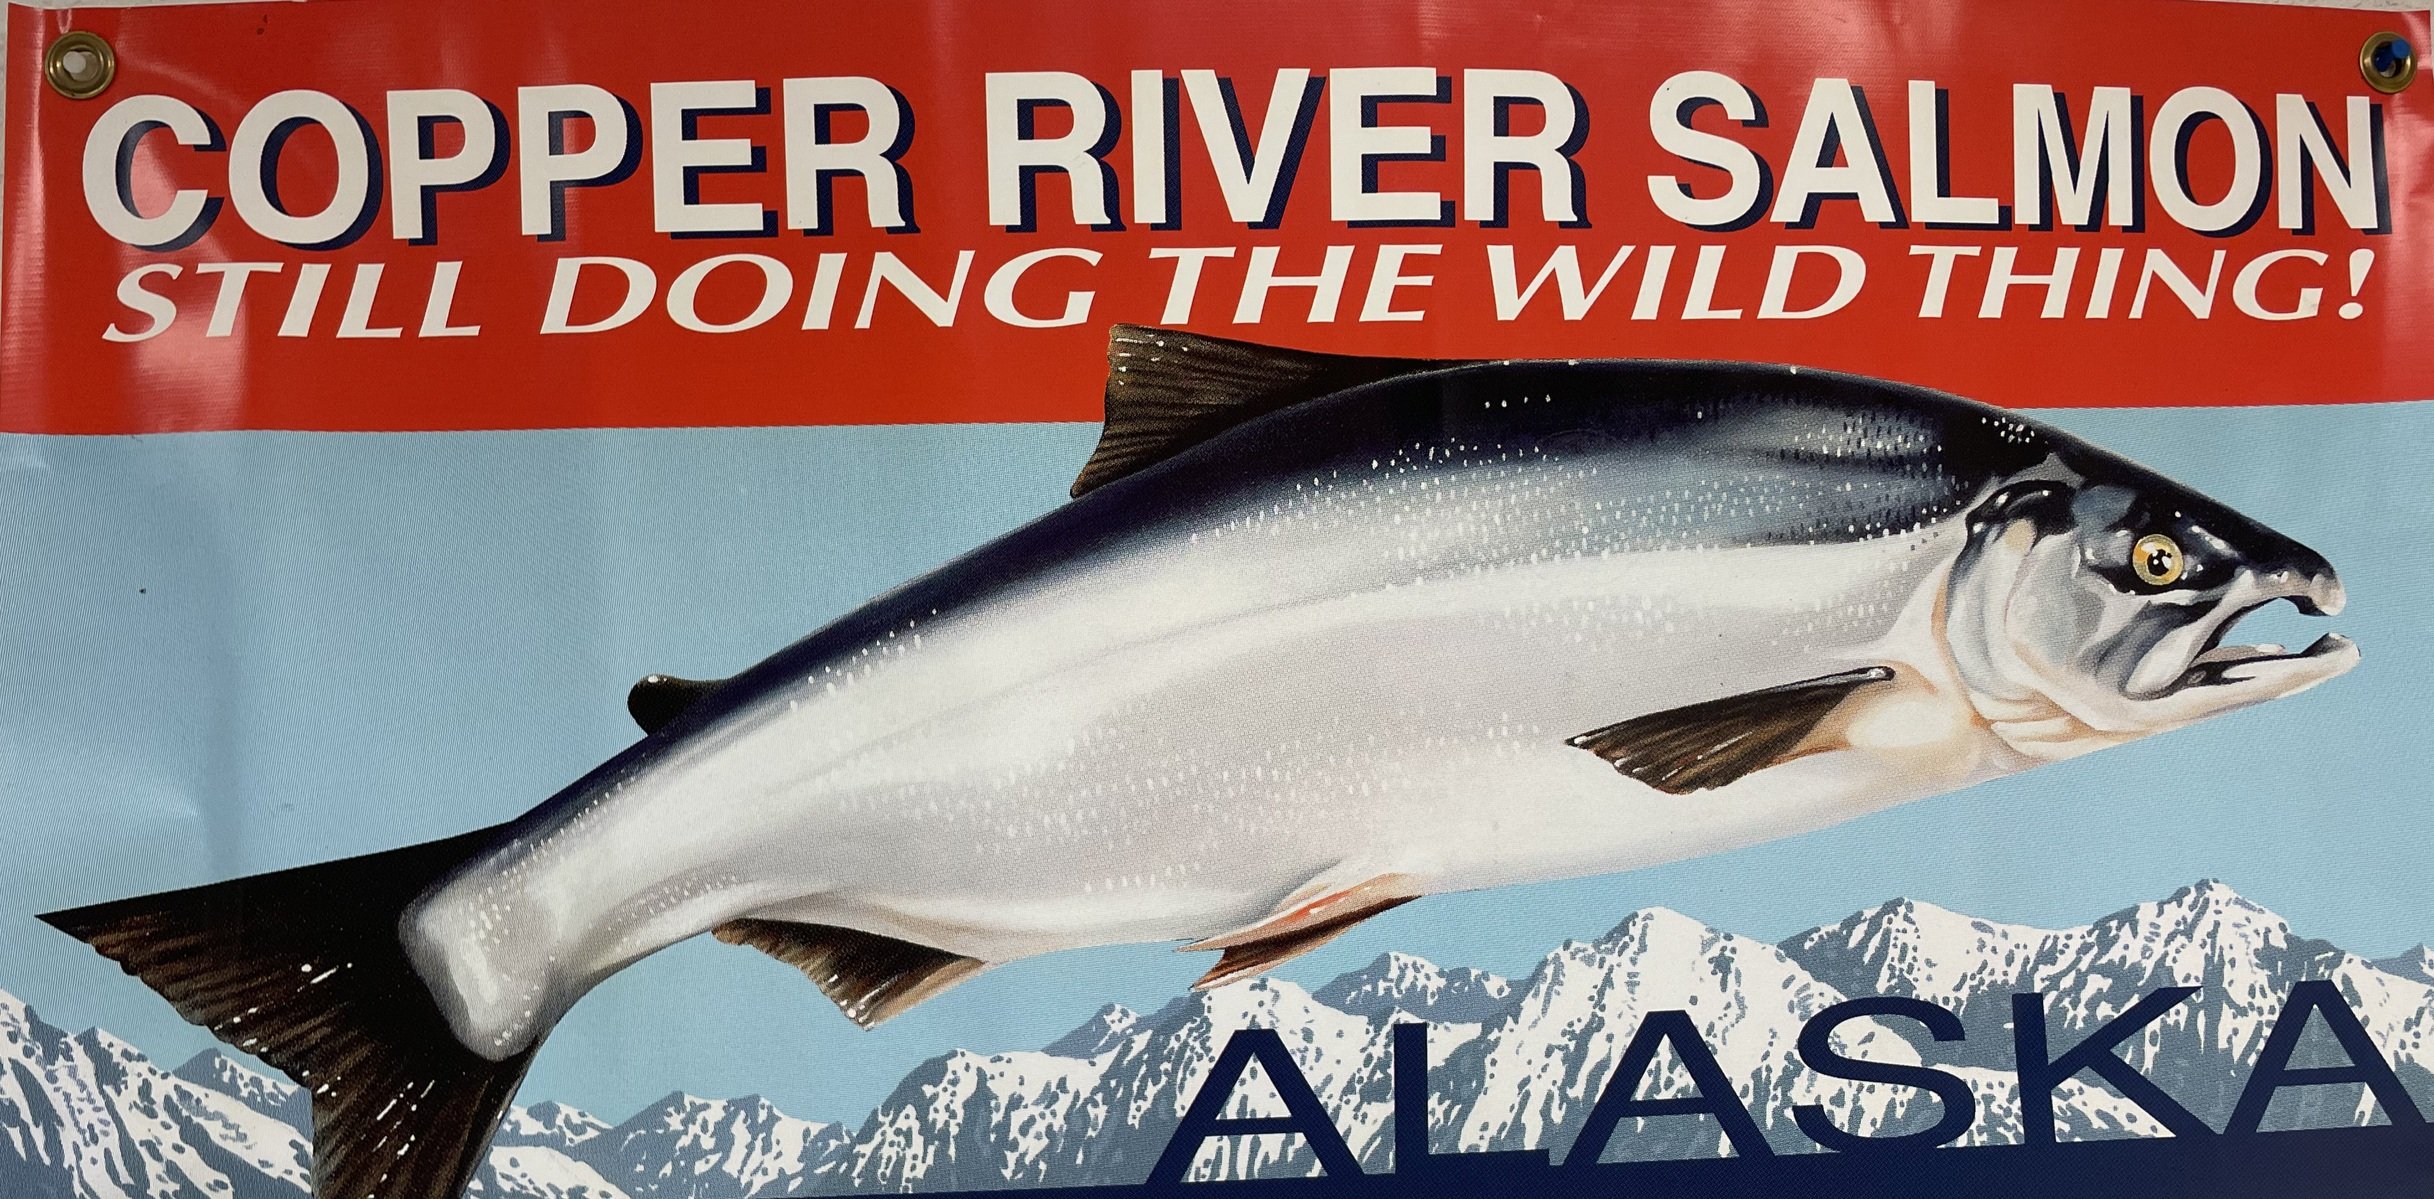 The Cooper River is world famous for amazing salmon!